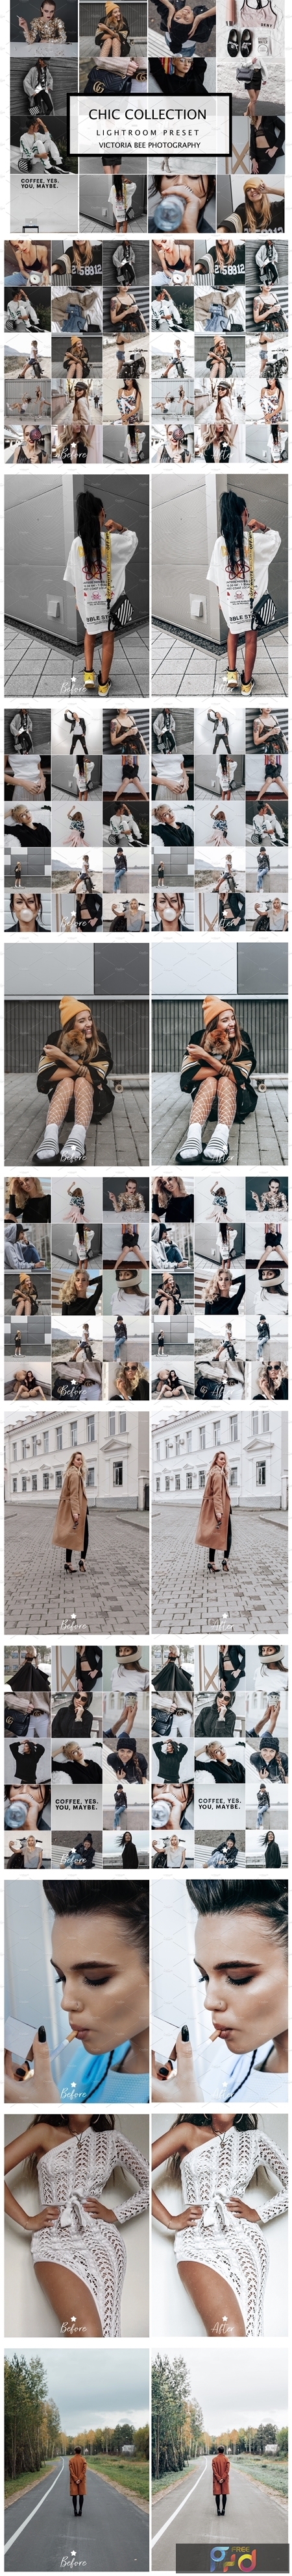 10 LIGHTROOM PRESETS CHIC COLLECTION 4171698 1